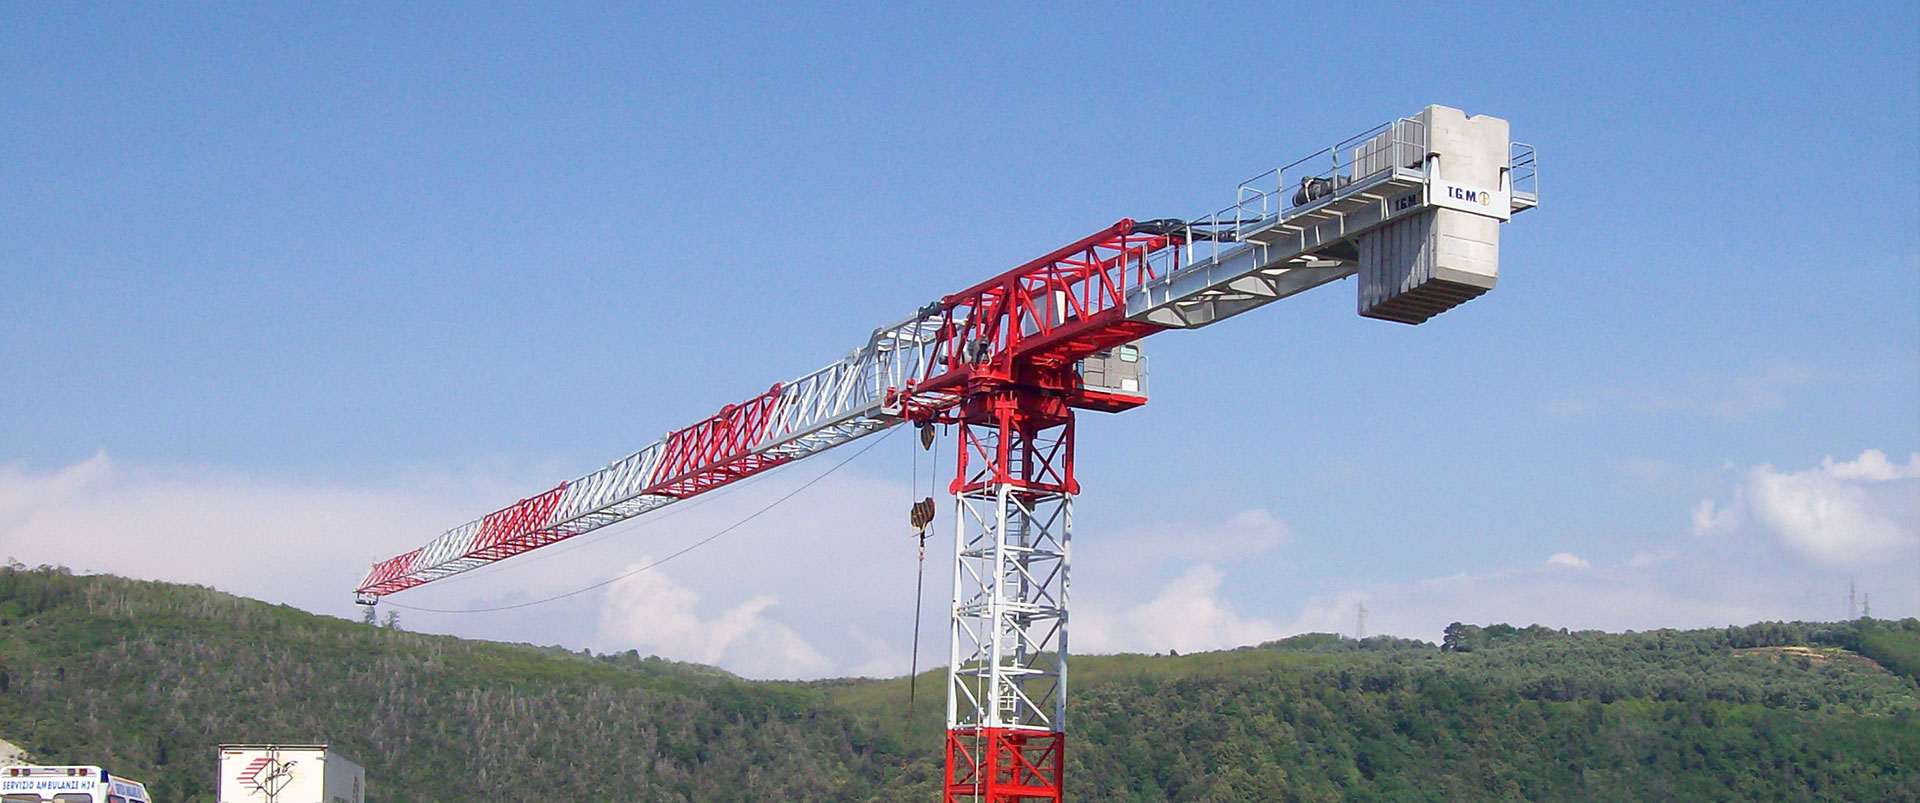 CREATE YOUR CRANE WITH US